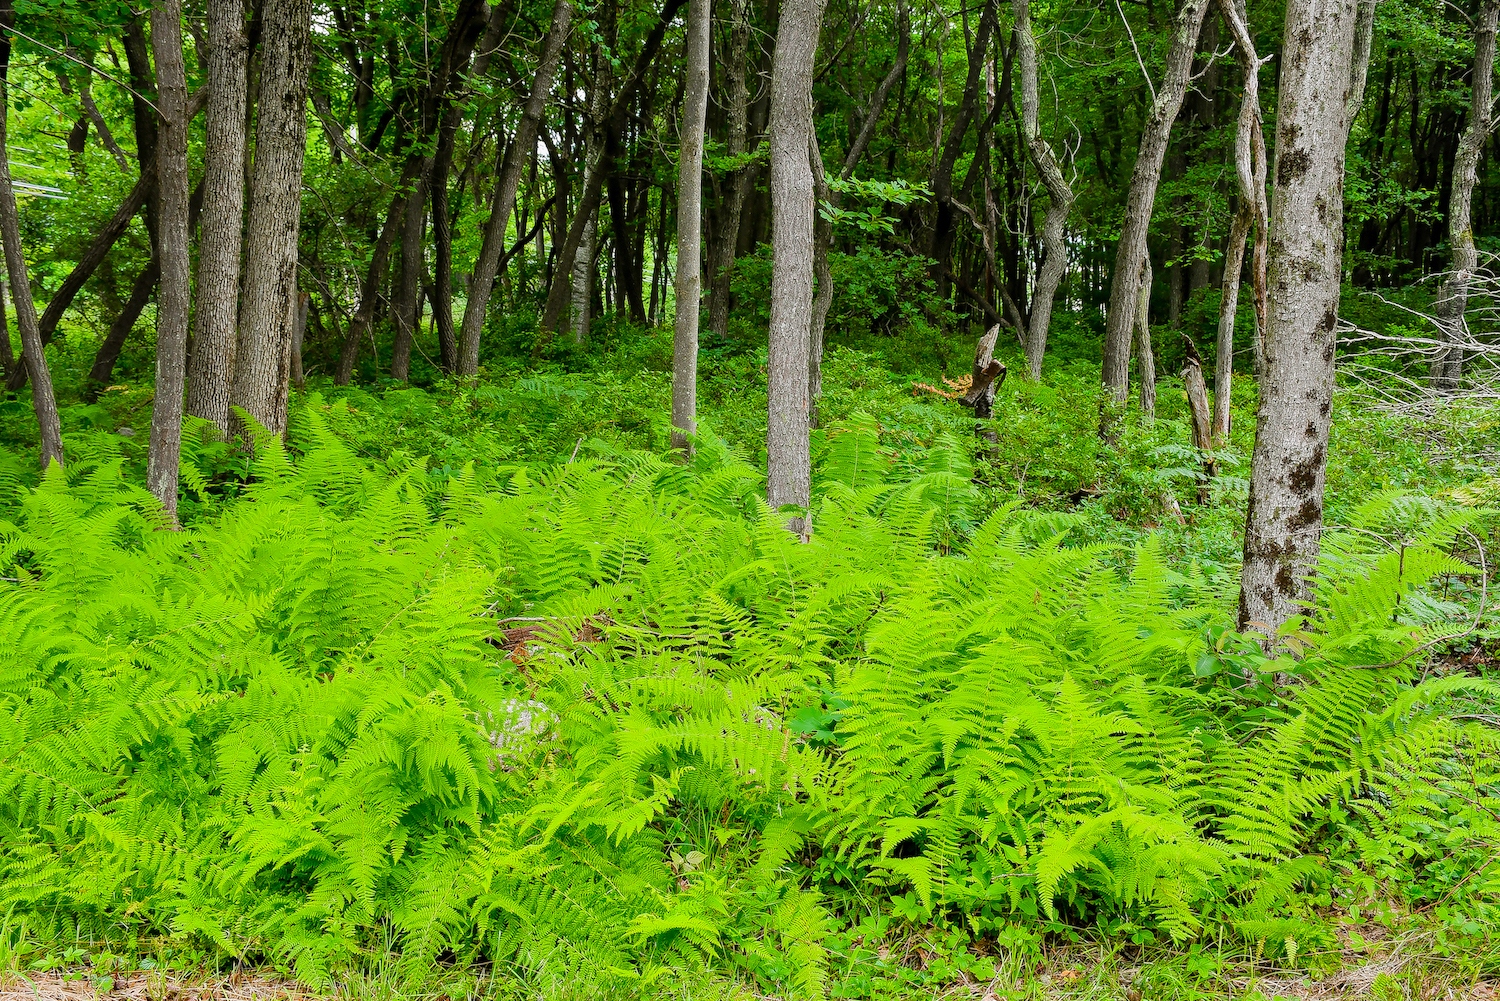 Several green ferns grow accross the floor of a forest.